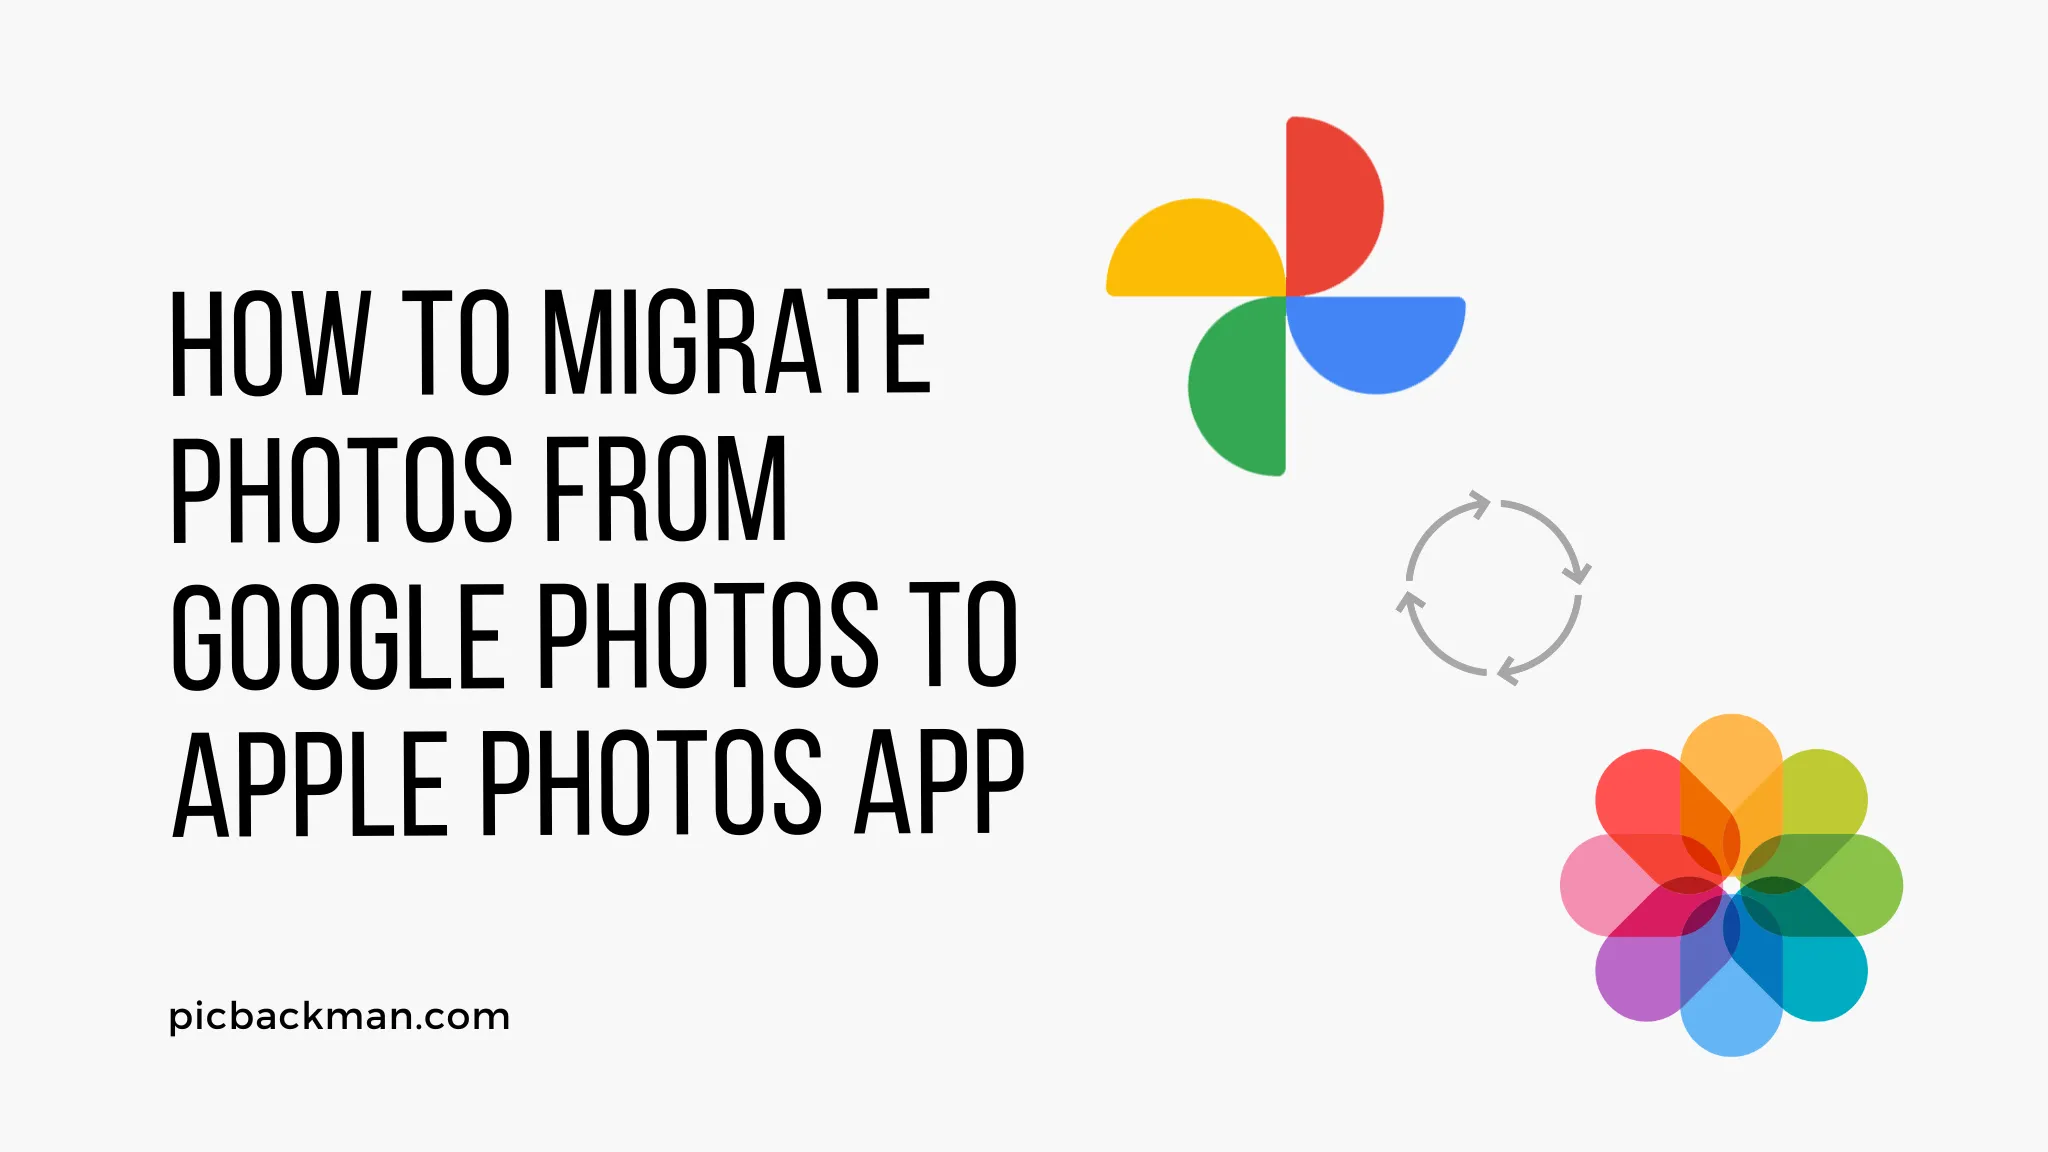 How to Migrate Photos from Google Photos to Apple Photos App